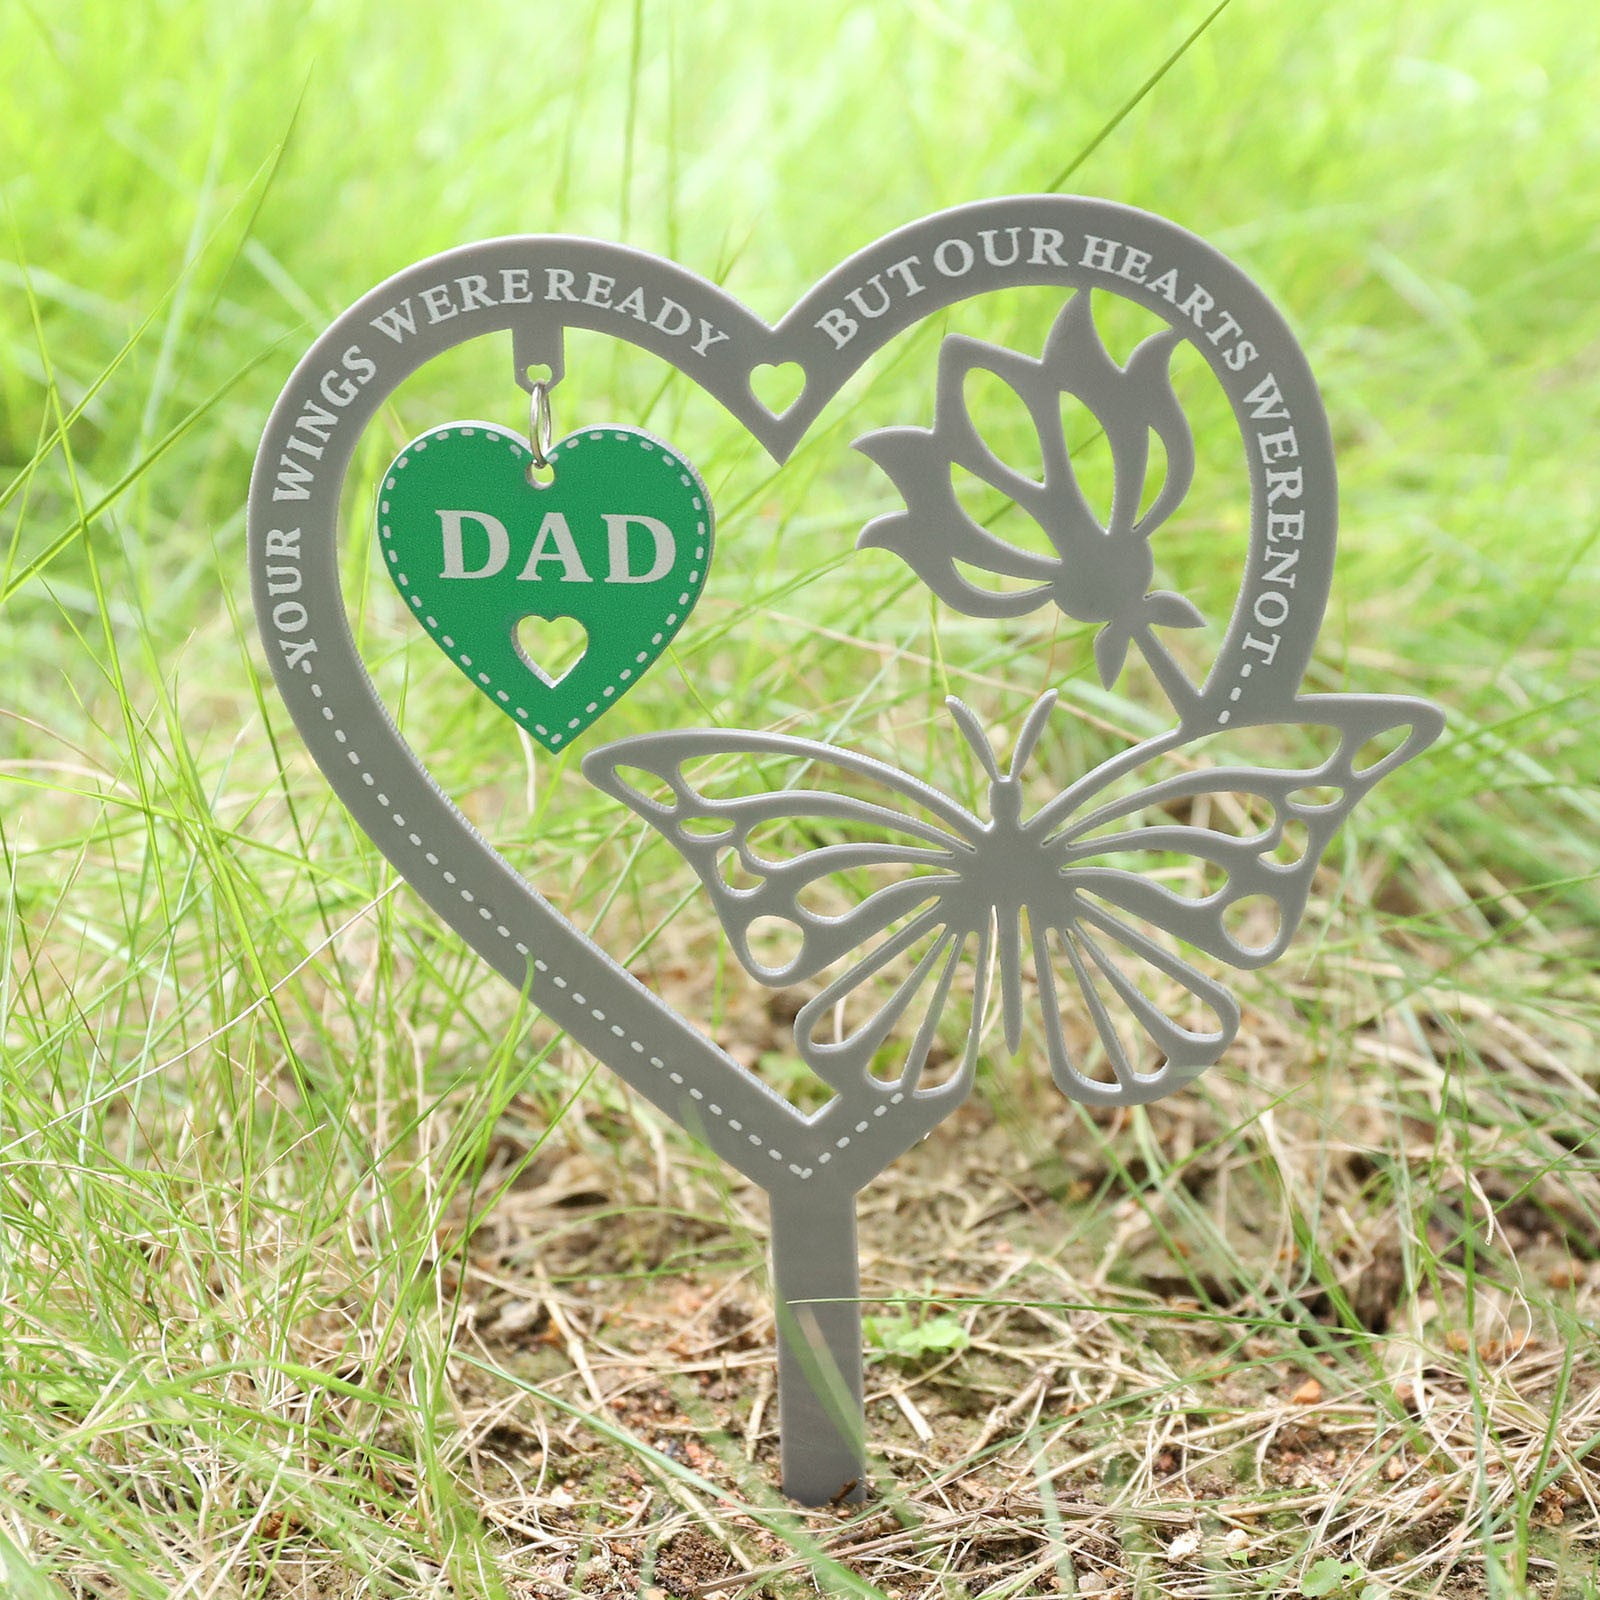 Heart Crafts Garden Plaque Father's Day Mother's Day Decoration JIJK Memorial Gift Butterfly Ornament Weatherproof Shatterproof Keepsake Decor for Yard Outdoor Home